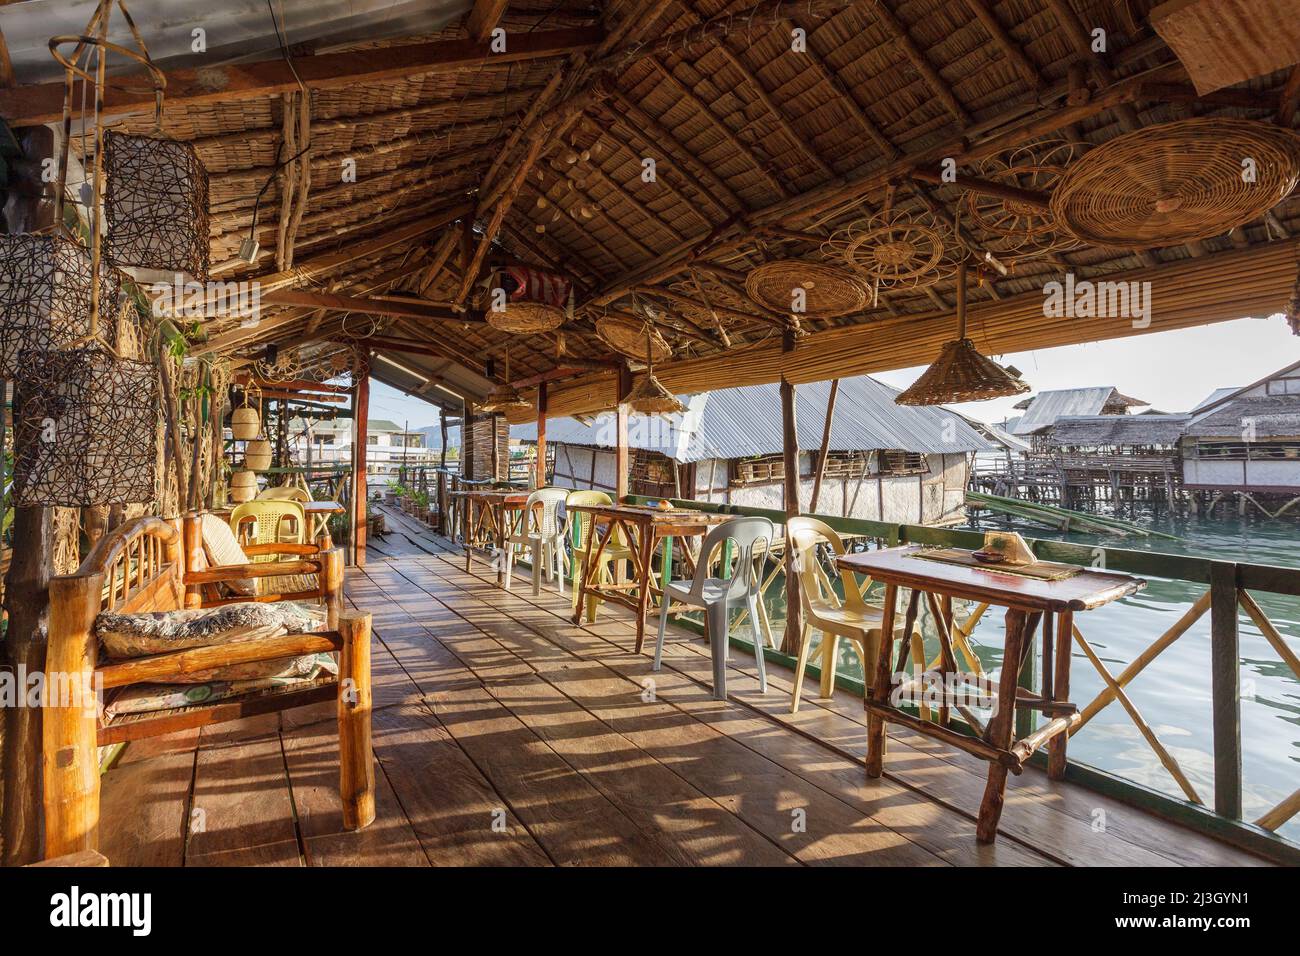 Philippines, Palawan, Calamianes archipelago, Coron Town, Krystal Lodge charming hotel, on stilts and made of natural materials, terrace bathed in late afternoon warm light Stock Photo